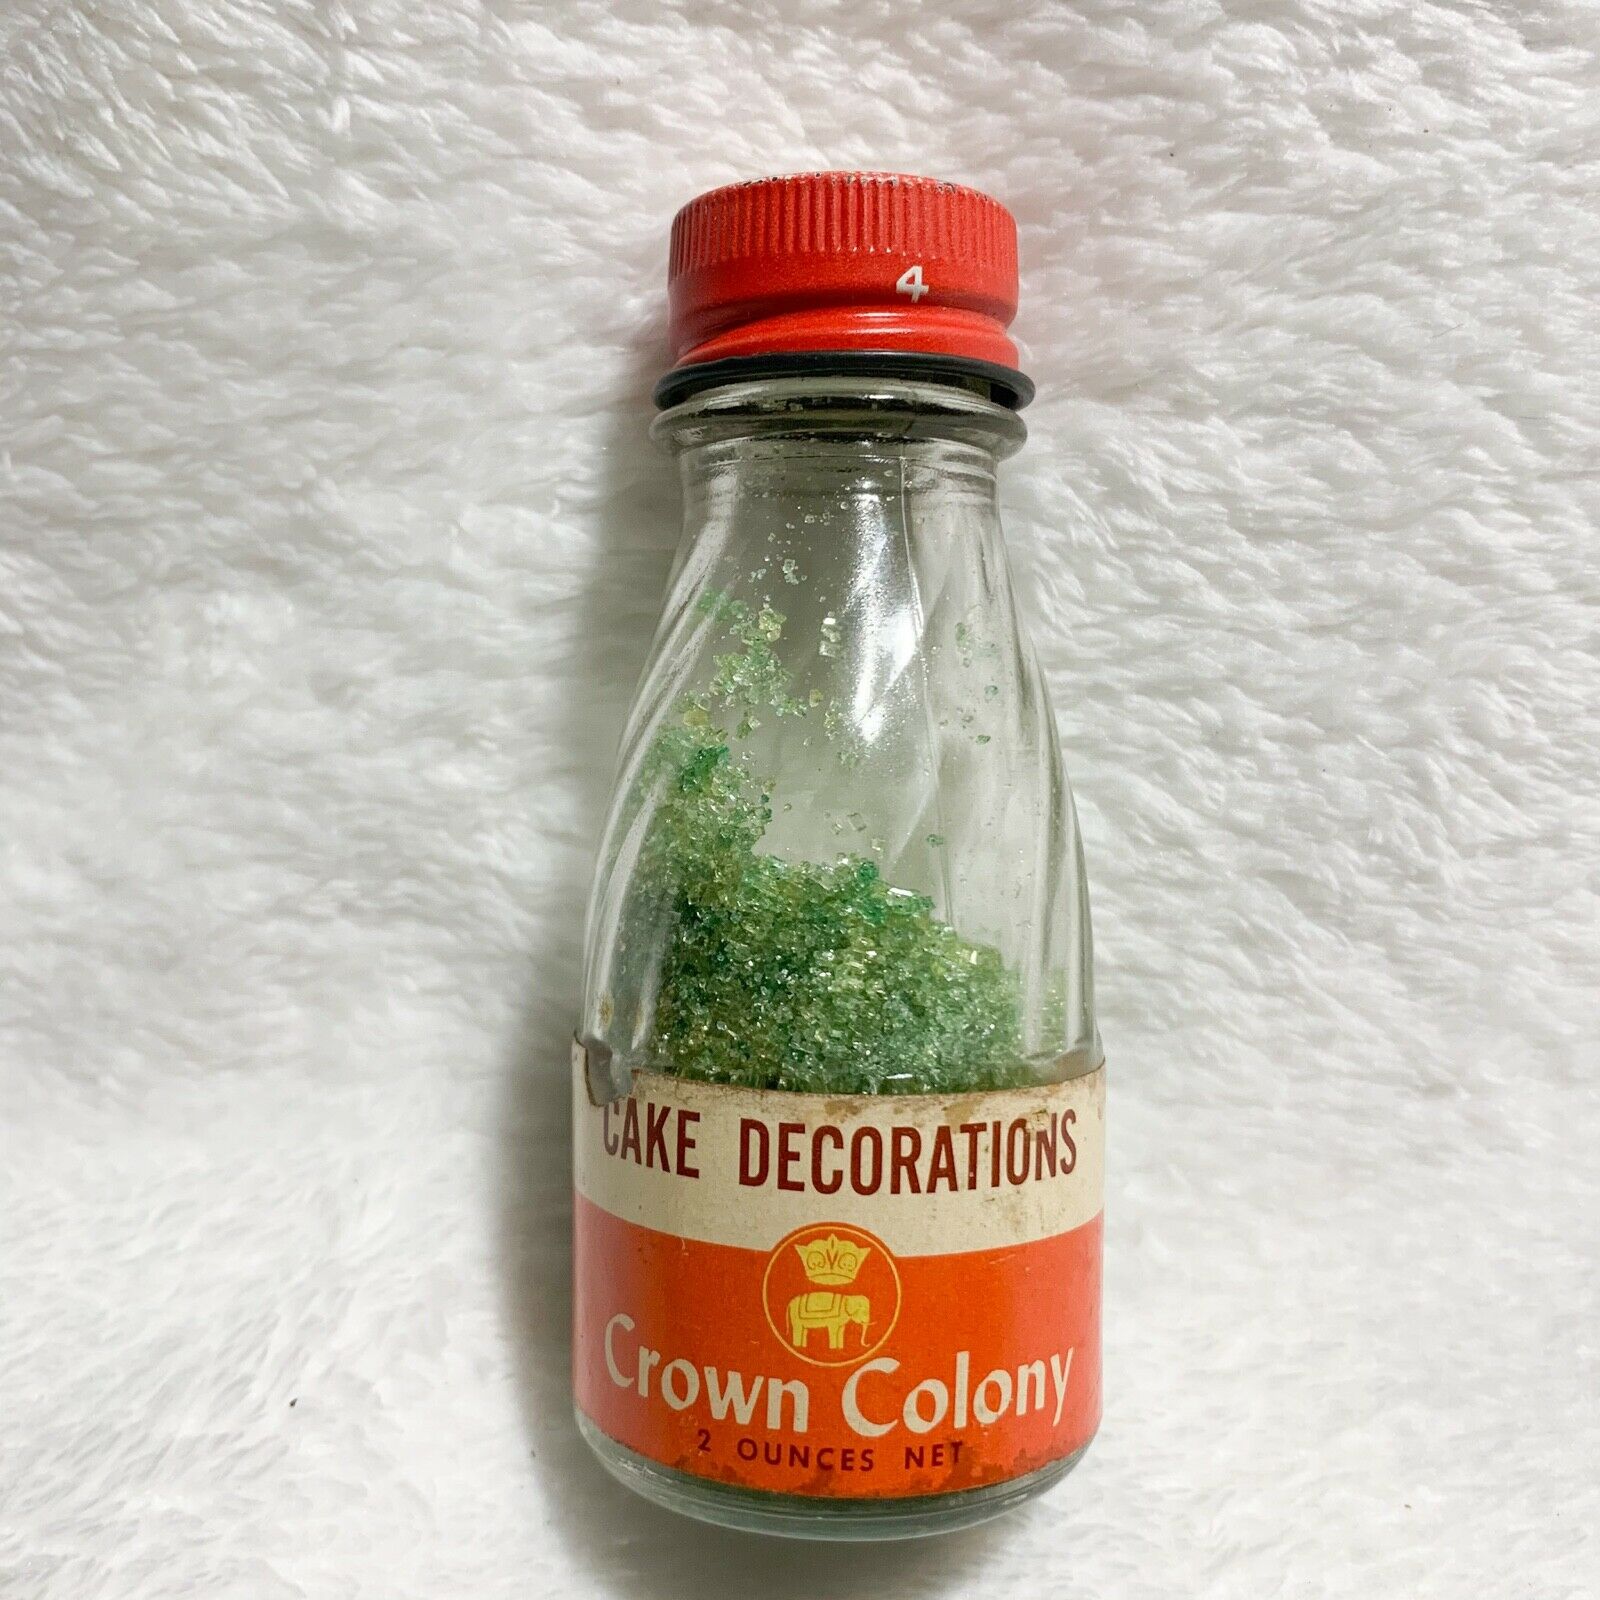 Vintage Crown Colony Green Sprinkles Cake Decorations 2 Ounce Glass Bottle